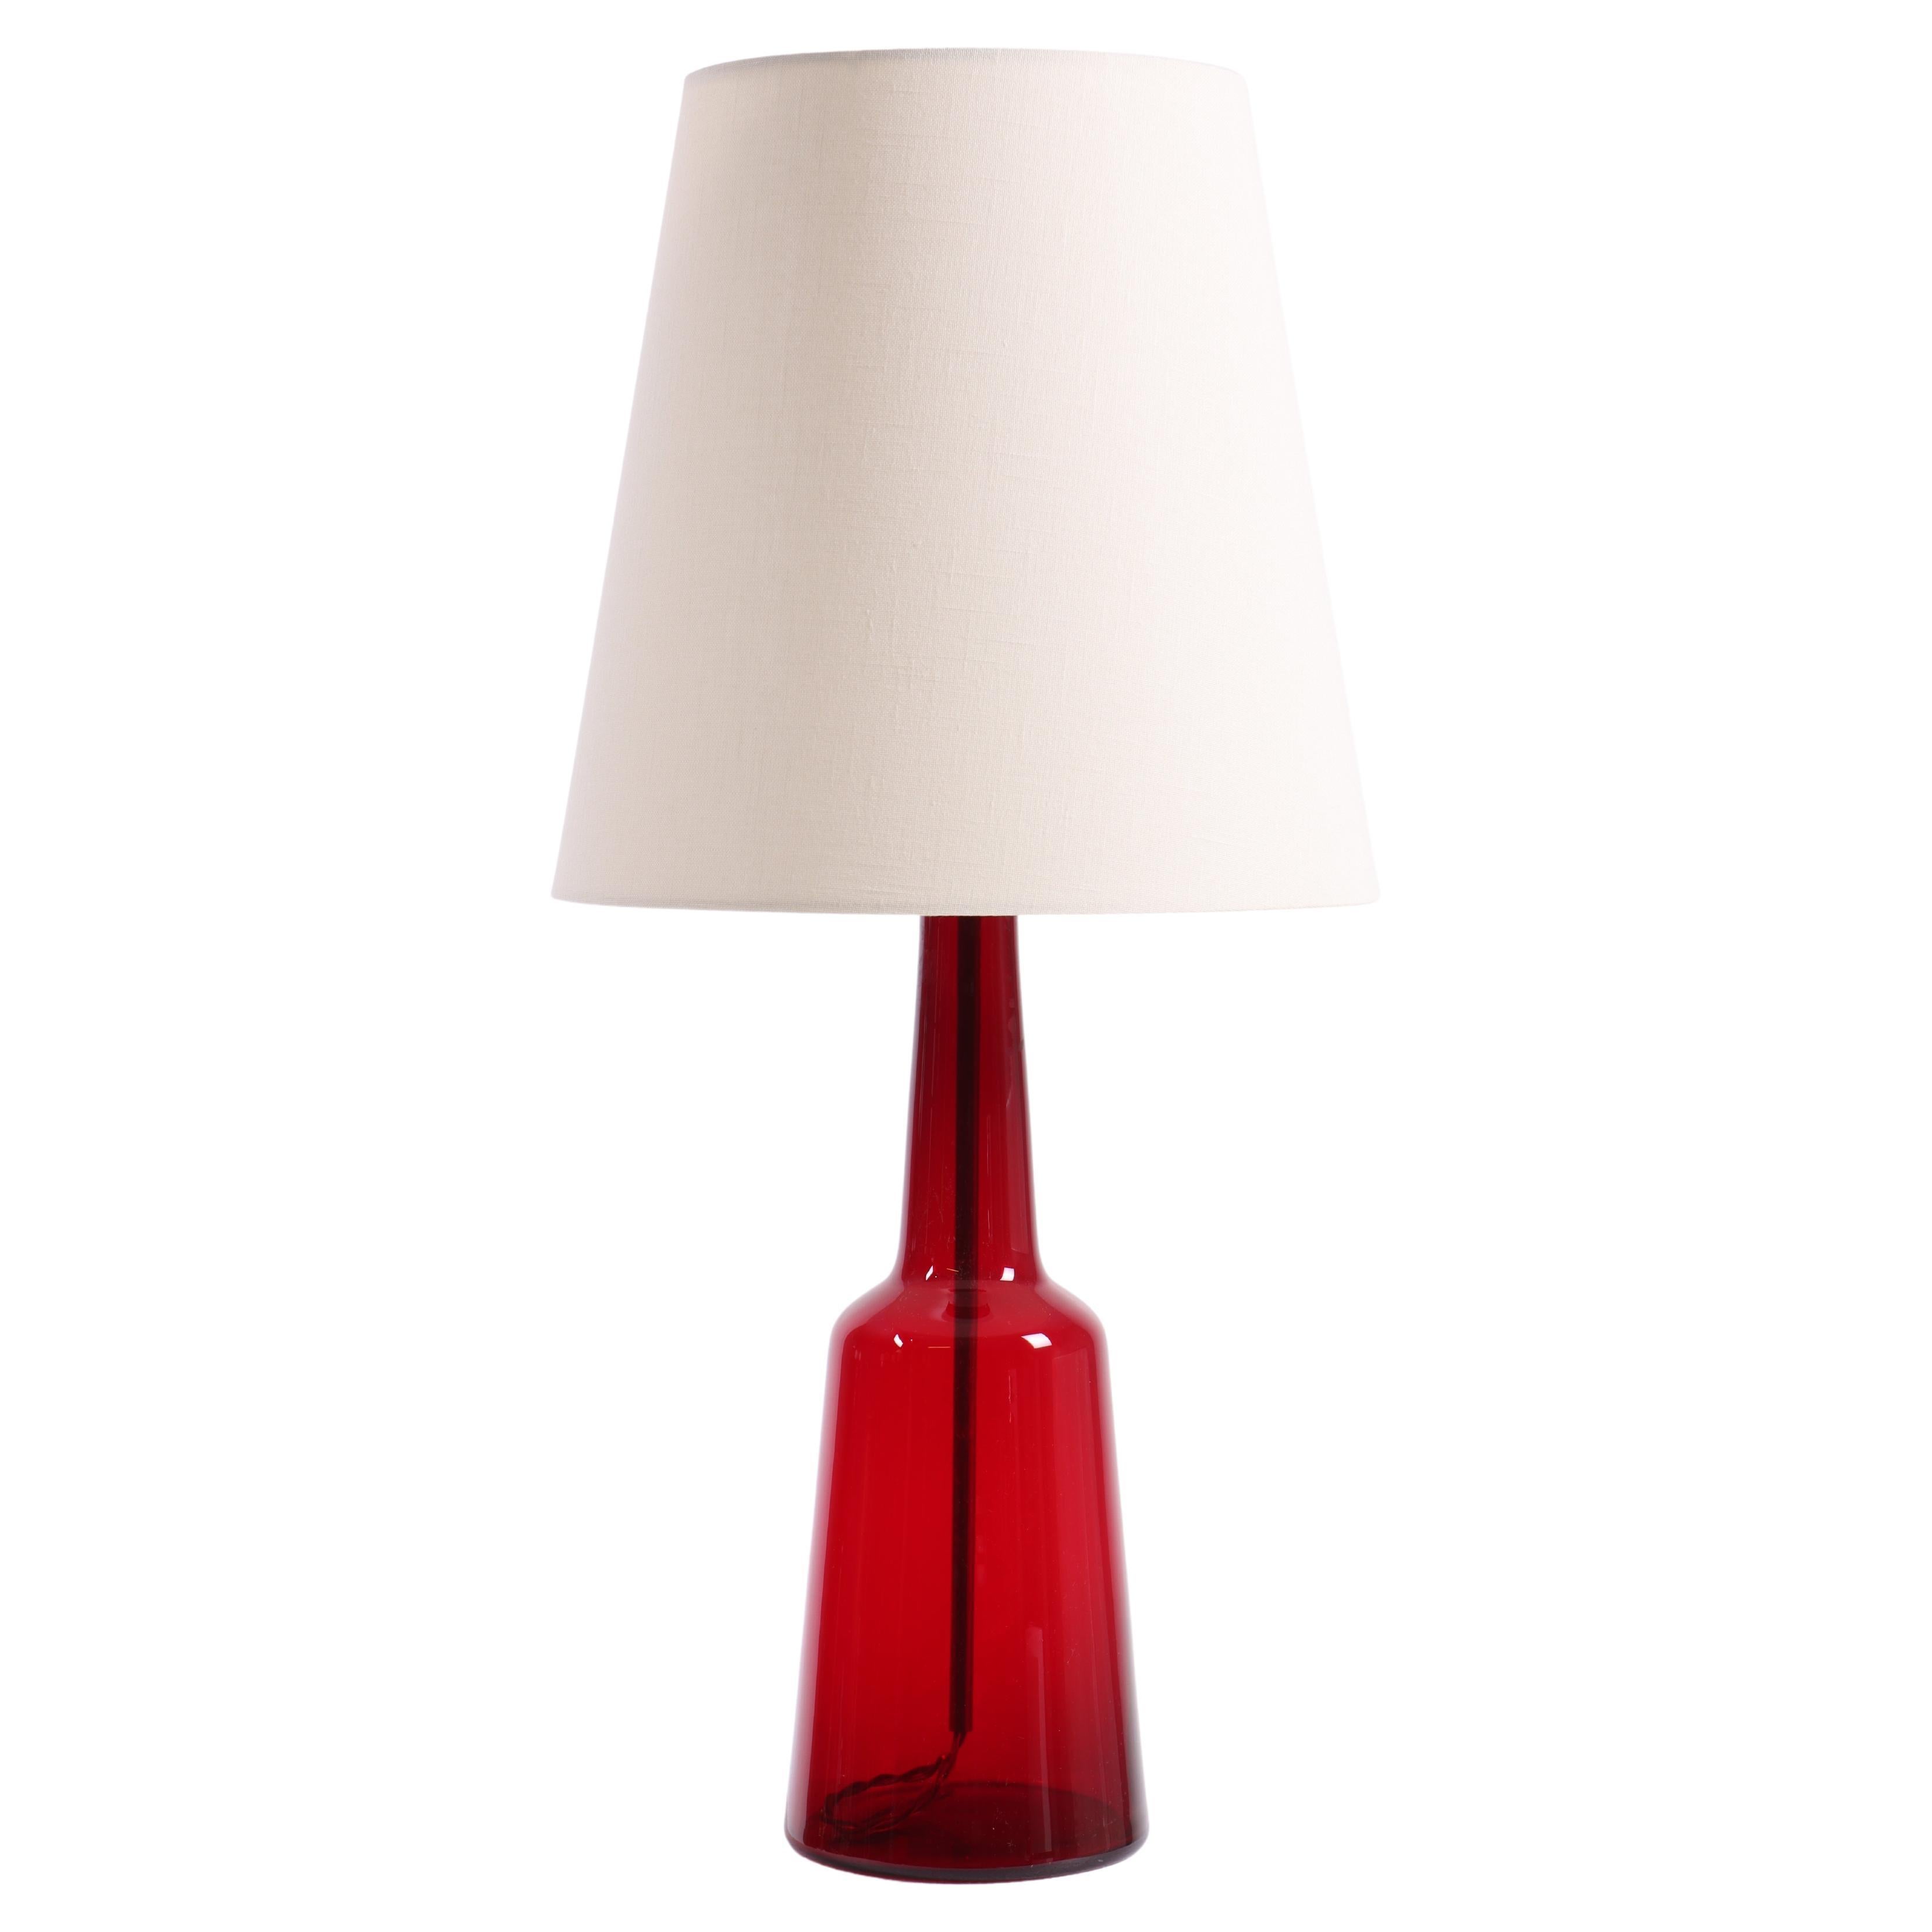 Midcentury Table Lamp in Red Glass by Holmegaard, 1950s For Sale